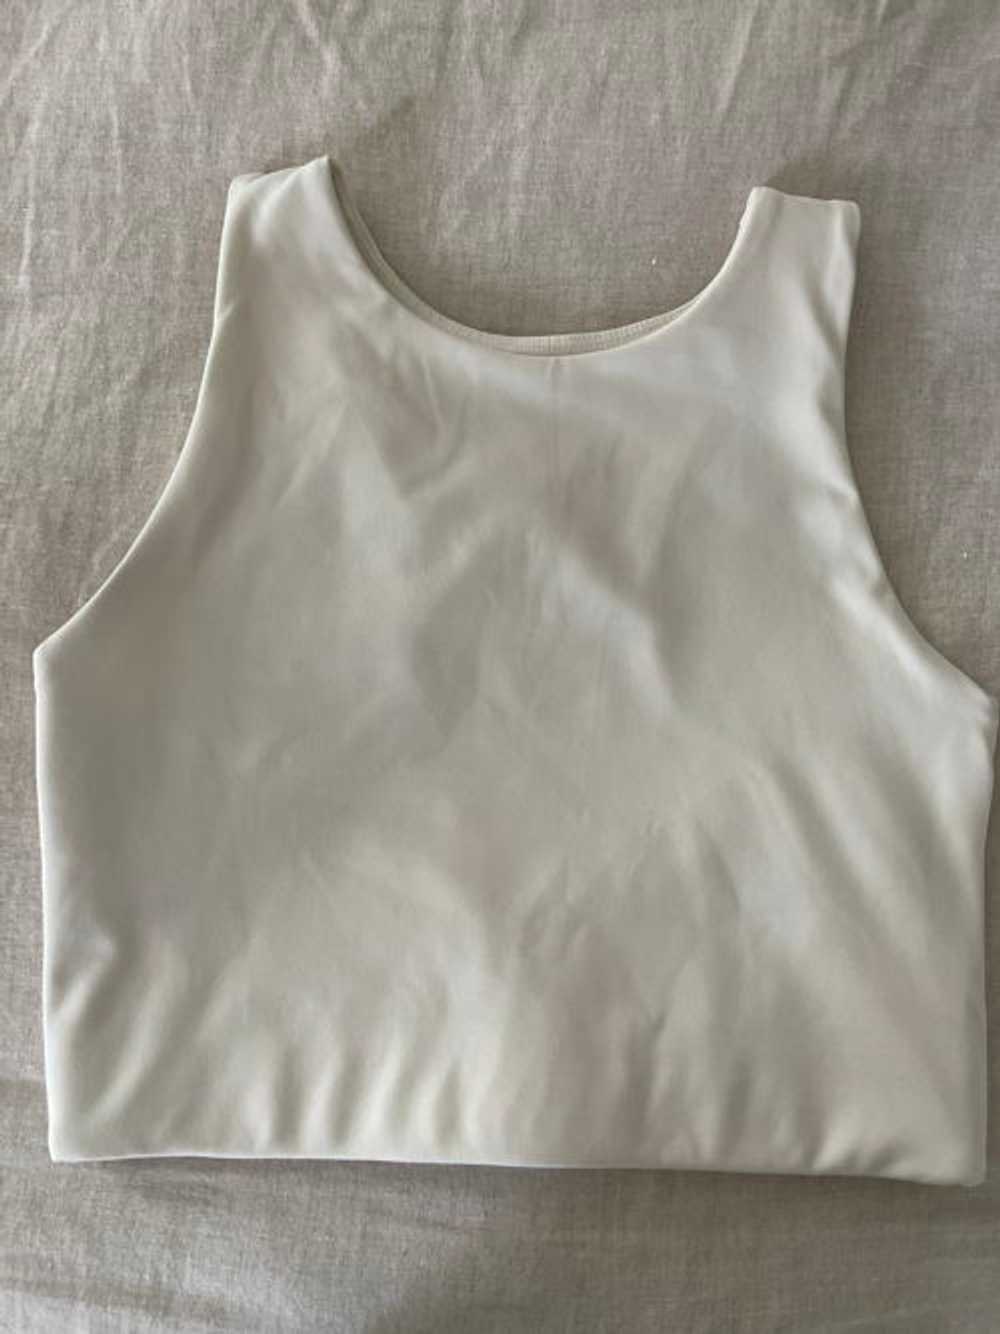 Girlfriend Collective Ivory Dylan Tank Bra - image 3